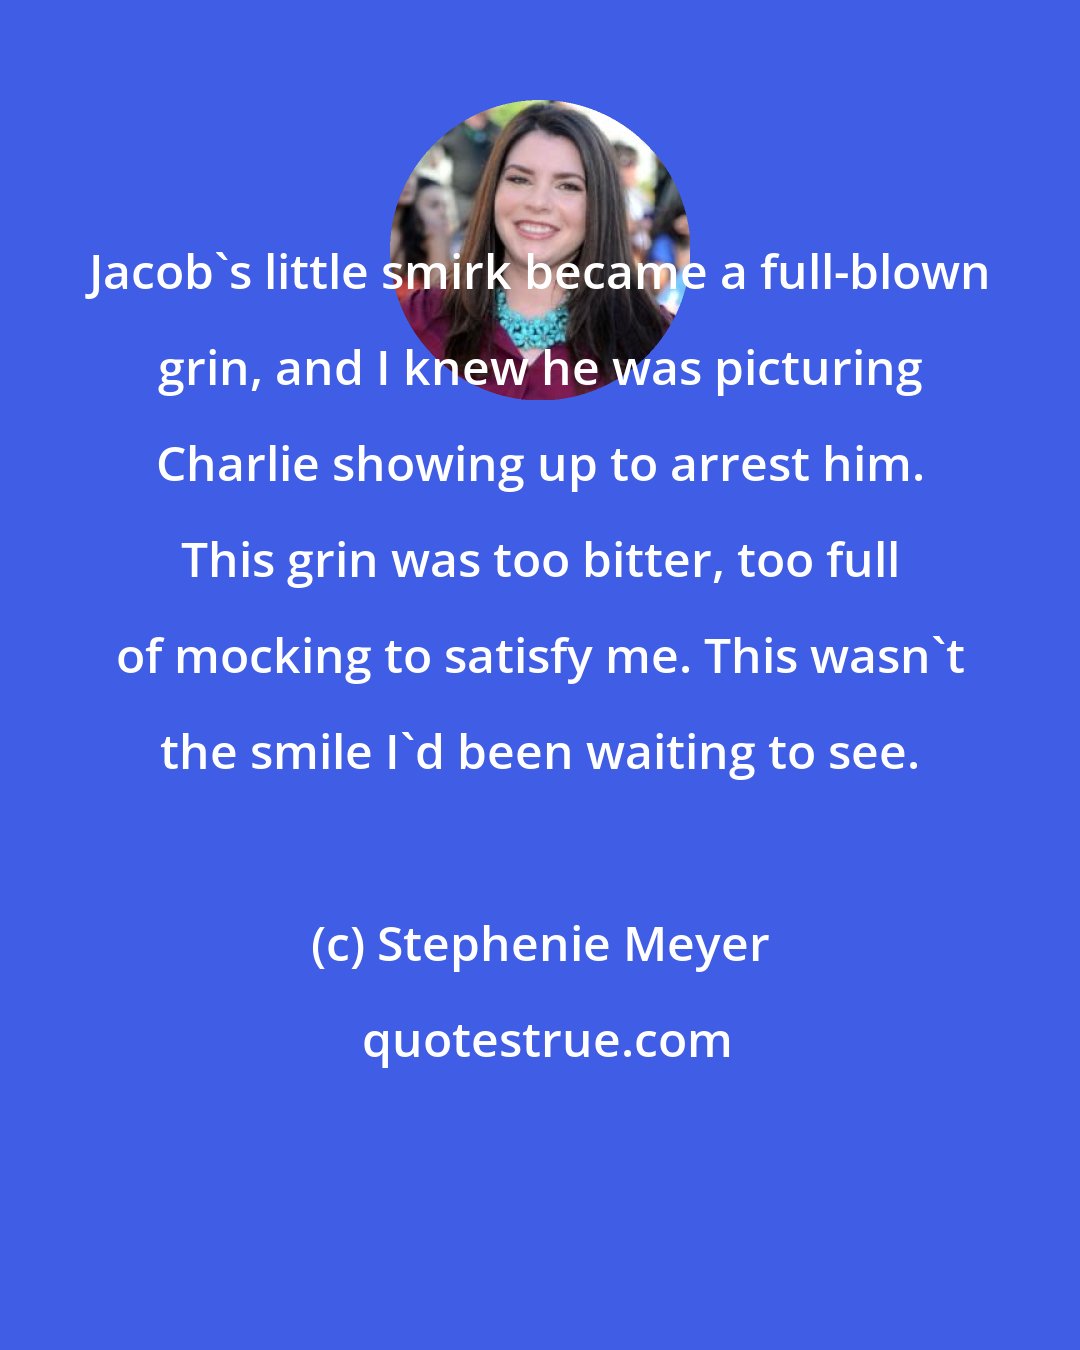 Stephenie Meyer: Jacob's little smirk became a full-blown grin, and I knew he was picturing Charlie showing up to arrest him. This grin was too bitter, too full of mocking to satisfy me. This wasn't the smile I'd been waiting to see.